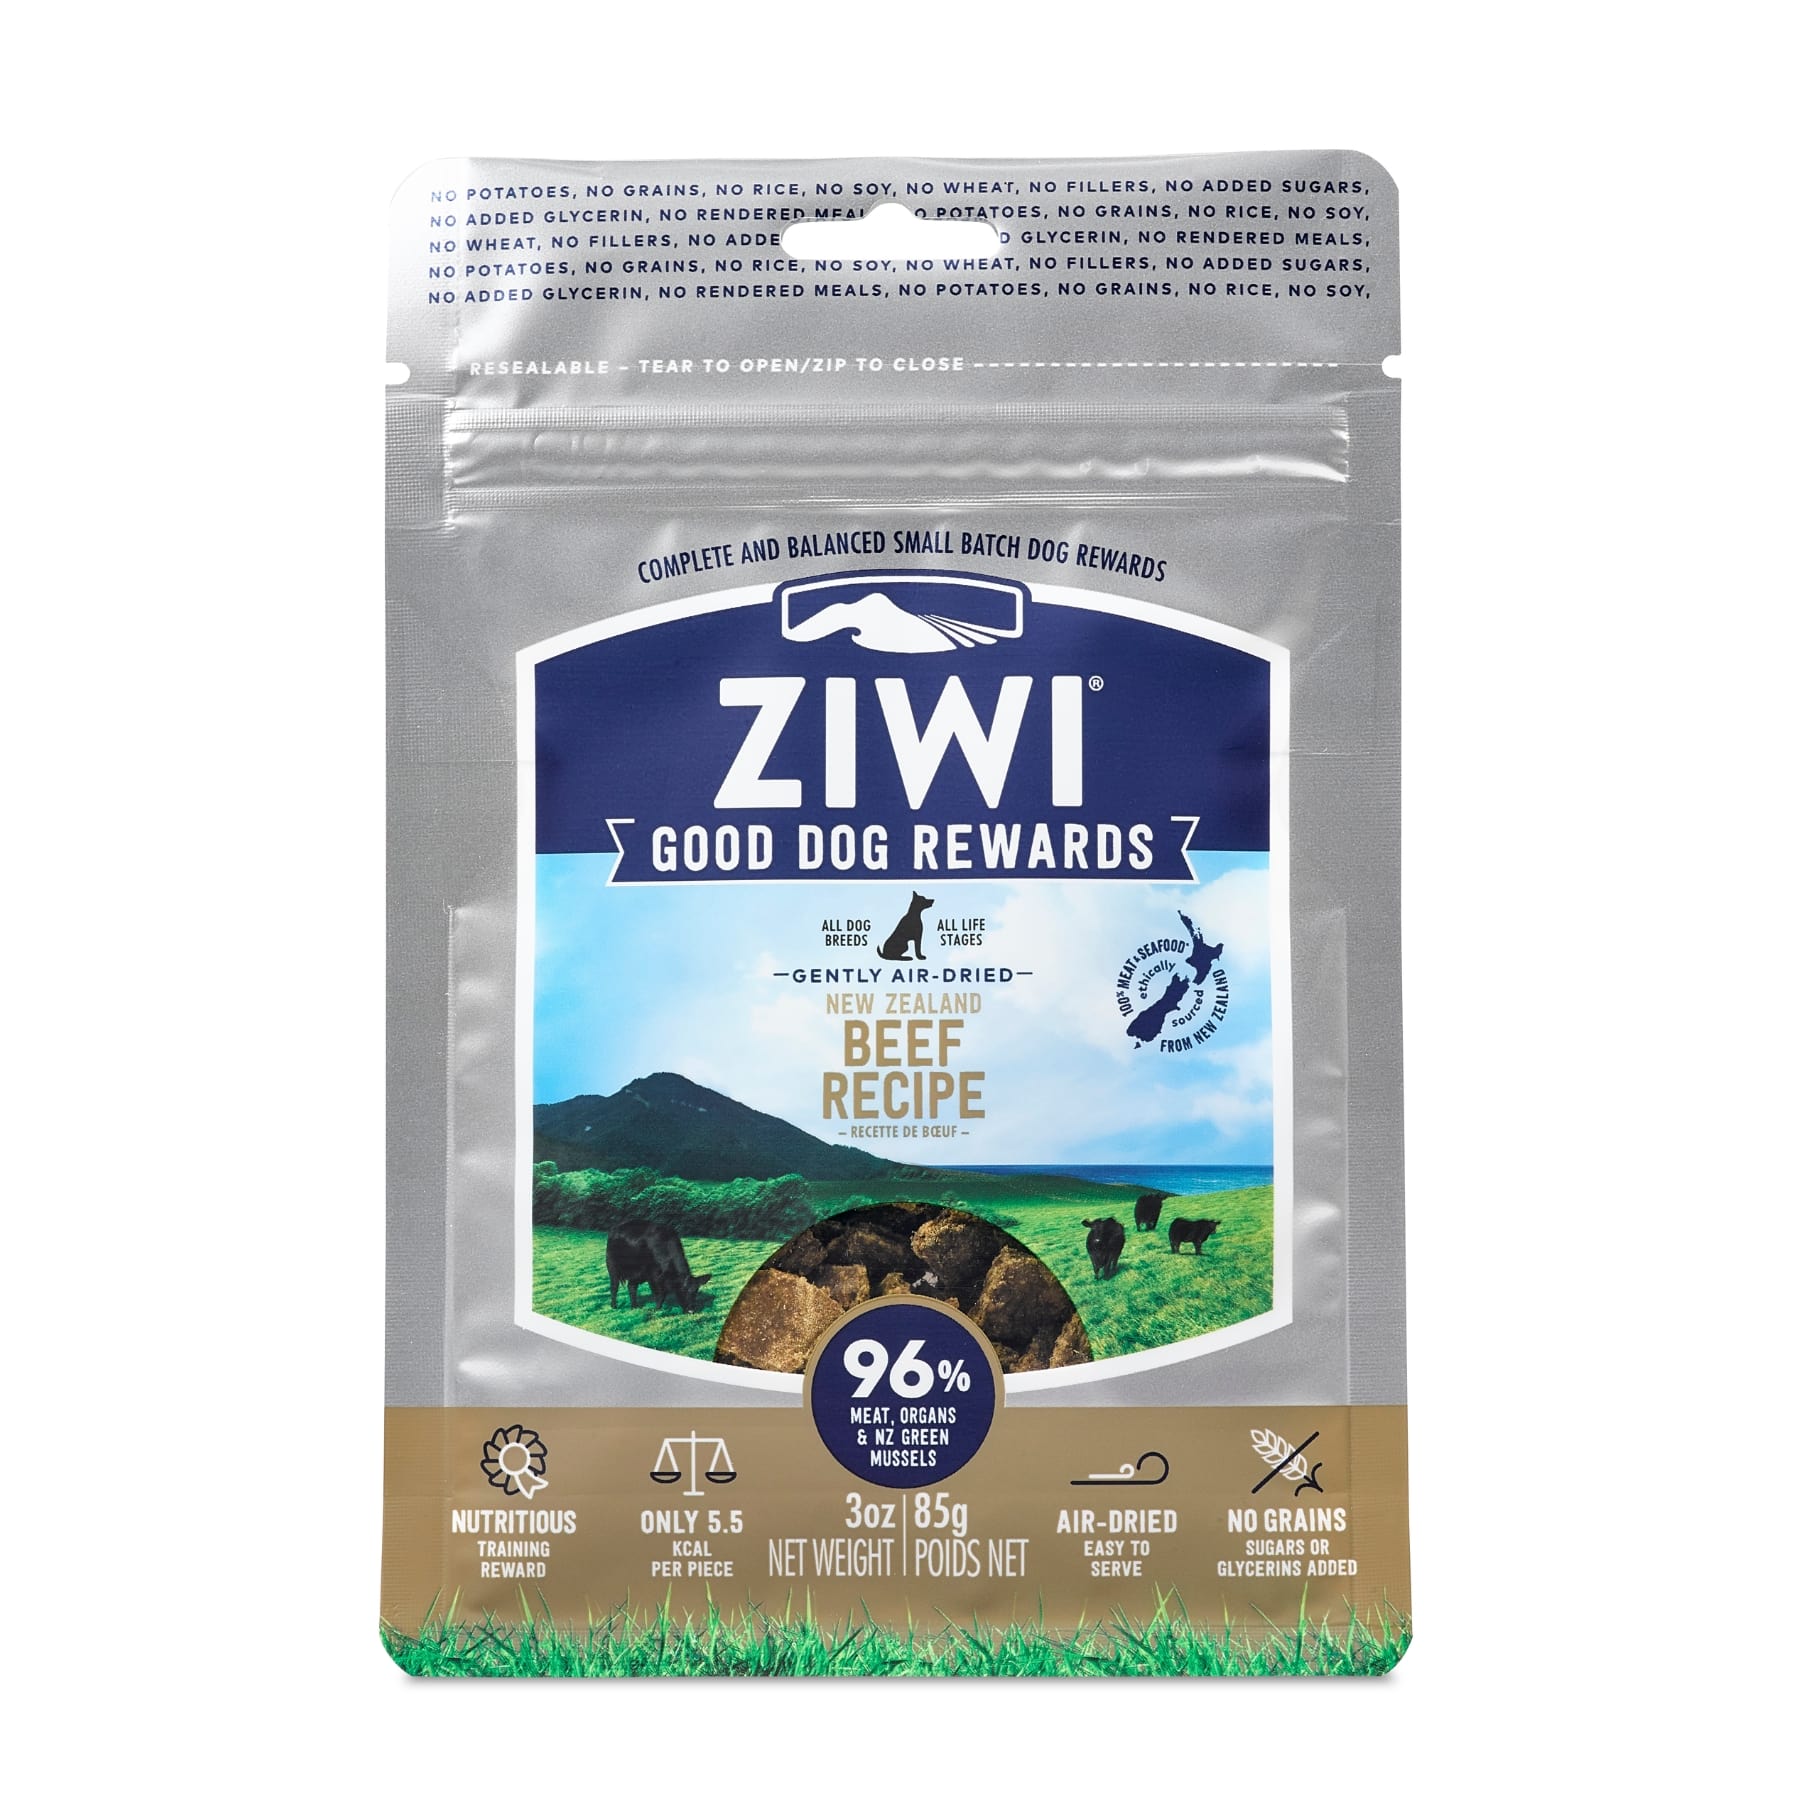 ZIWI Peak Good Dog Rewards Beef Recipe. Premium Treats for Dogs. All Breeds and Life Stages.